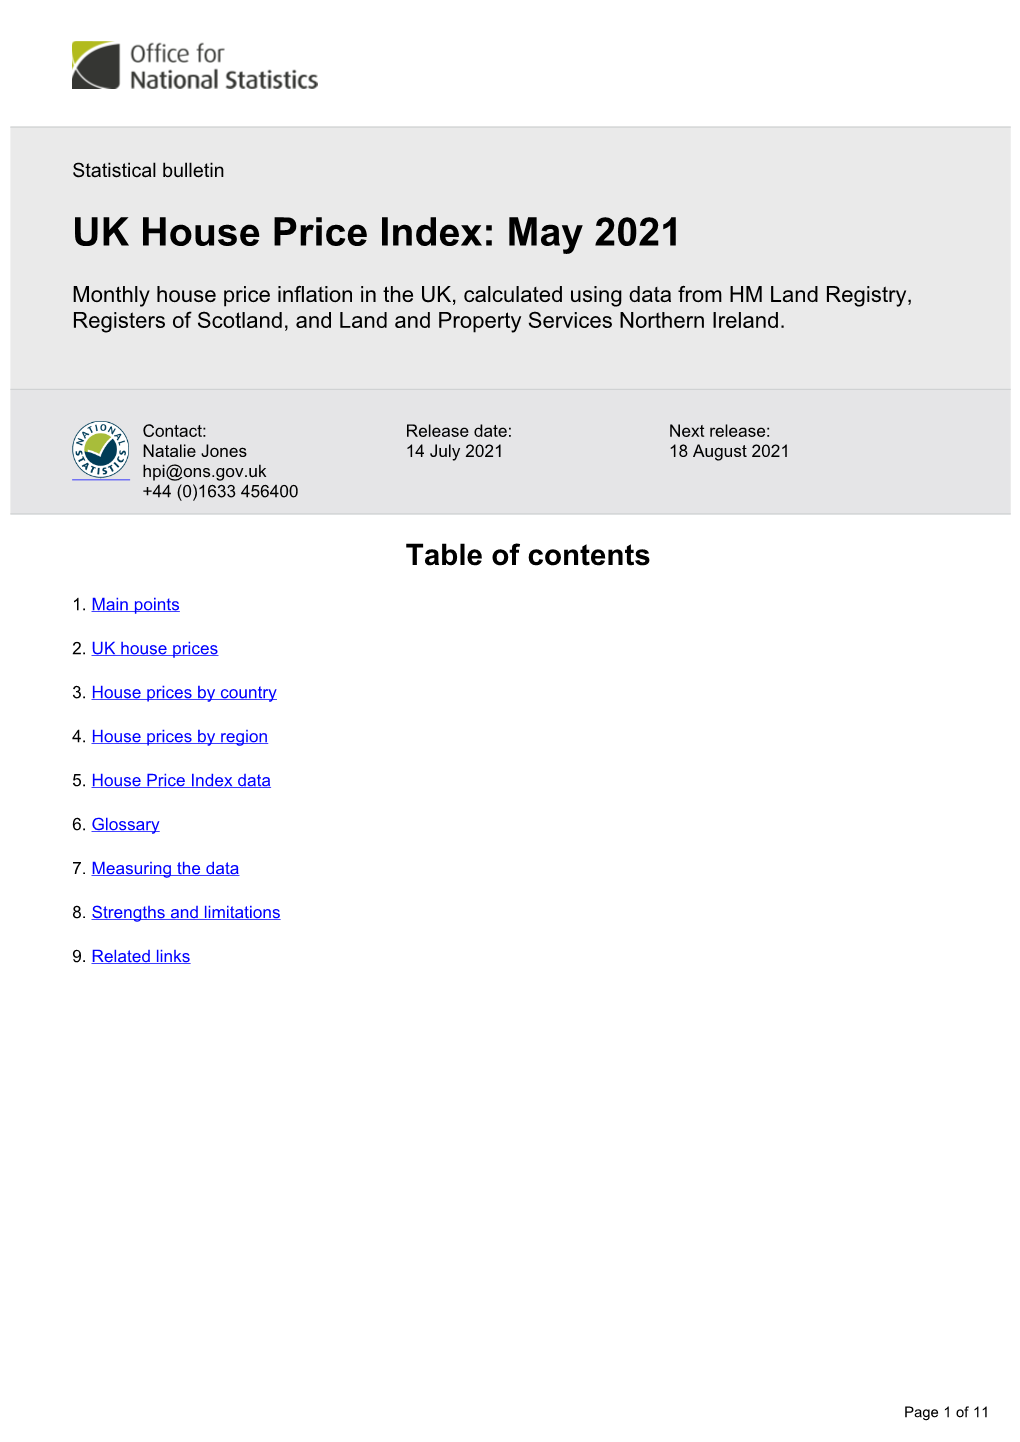 UK House Price Index: May 2021